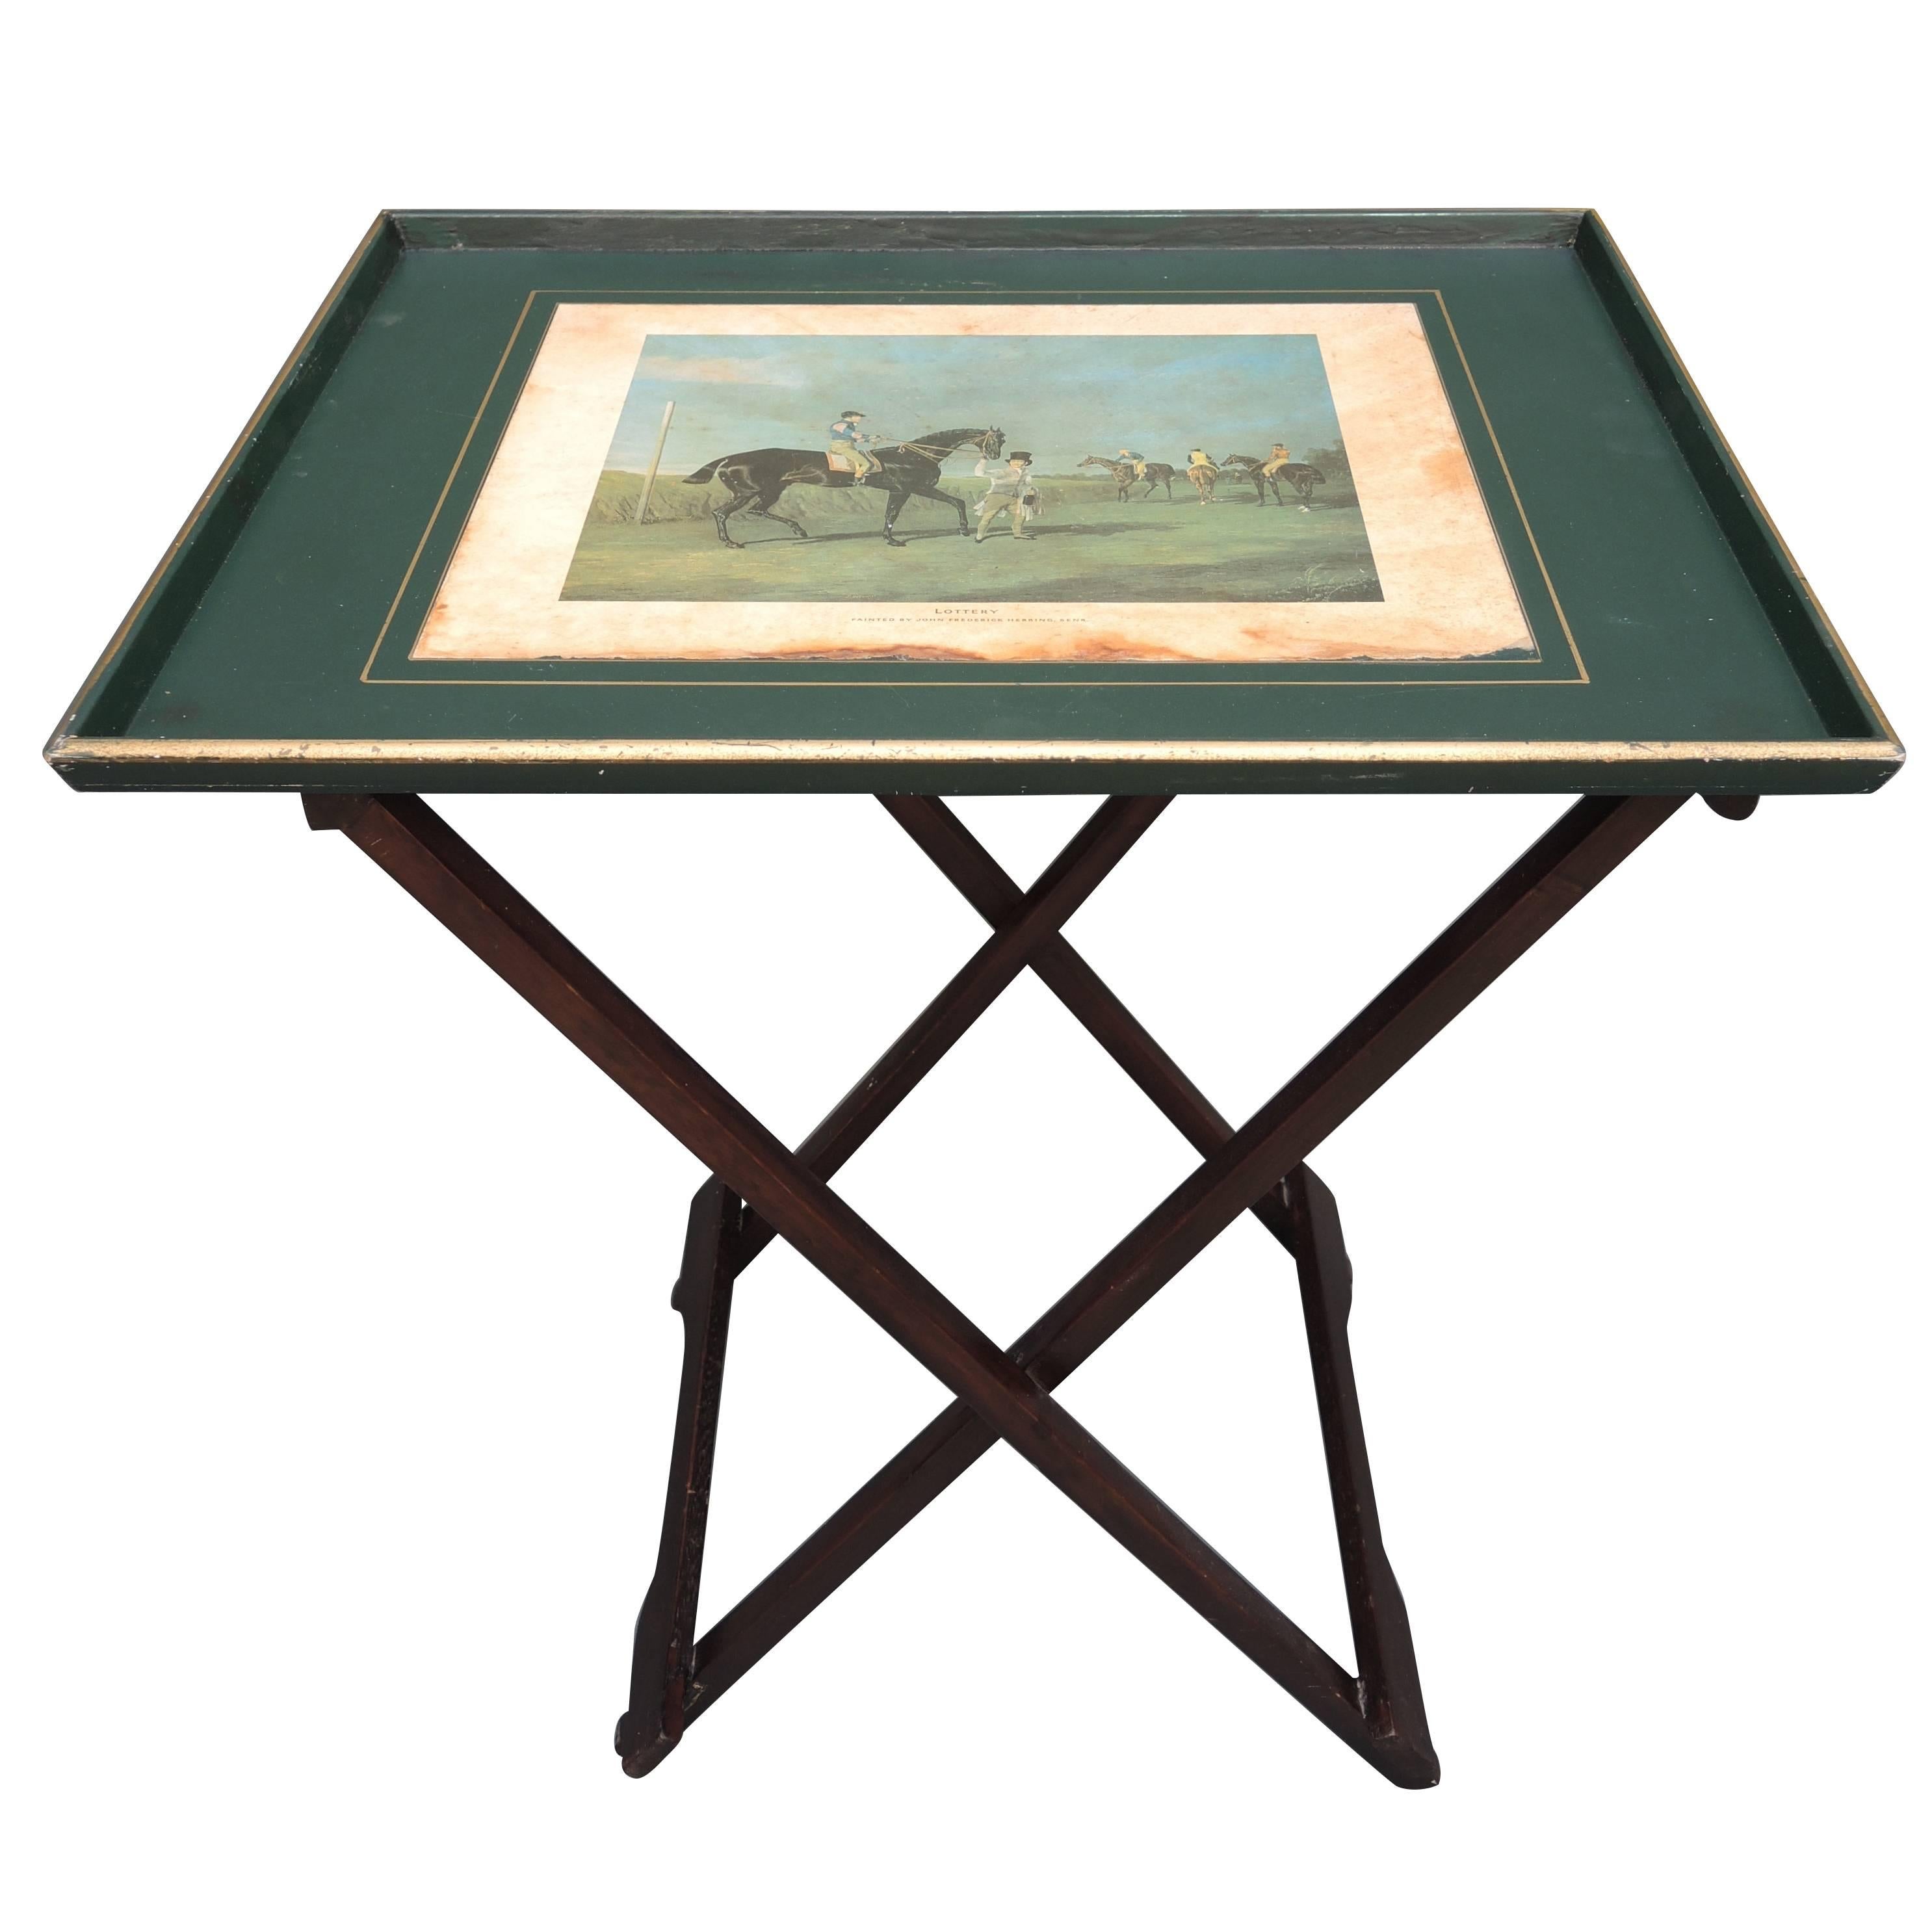 Vintage English Wood Bar Tray Table with Decoupage Equestrian Print Decoration.